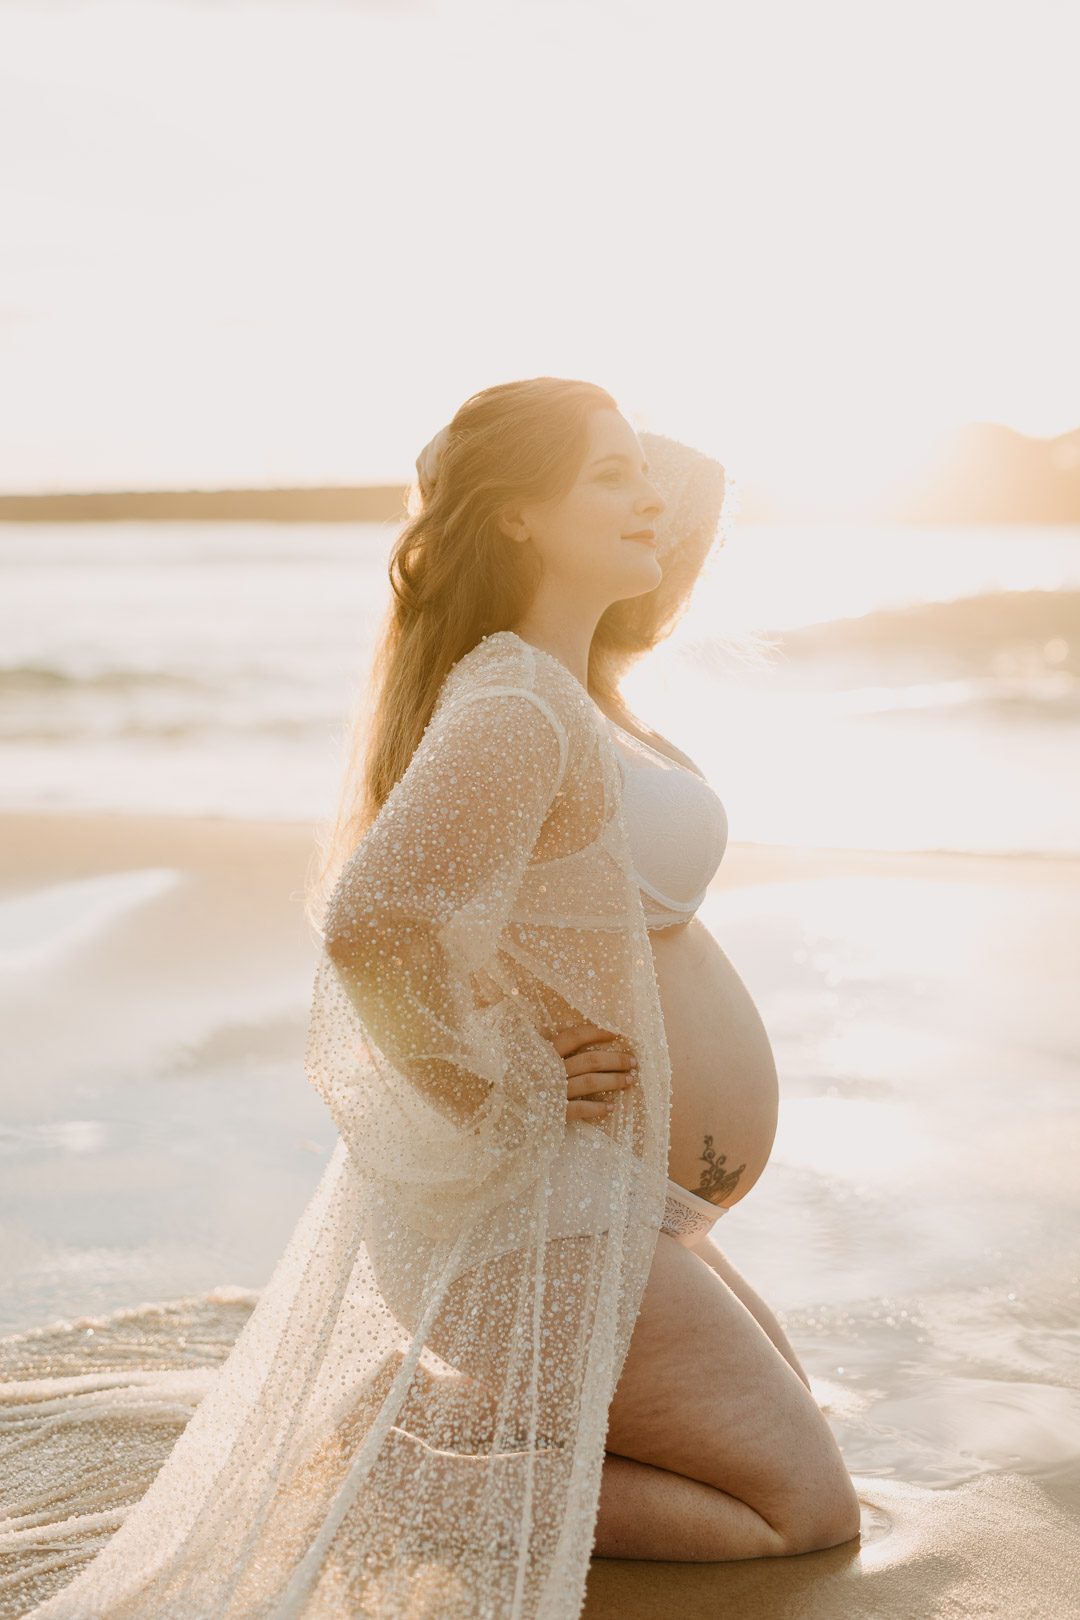 A pregnant mum wearing a sheer white robe kneels on a wet sandy beach, the golden rays of sunrise illuminate her bump. The photo was taken by Studio Magnolia, a Brisbane maternity photographer.